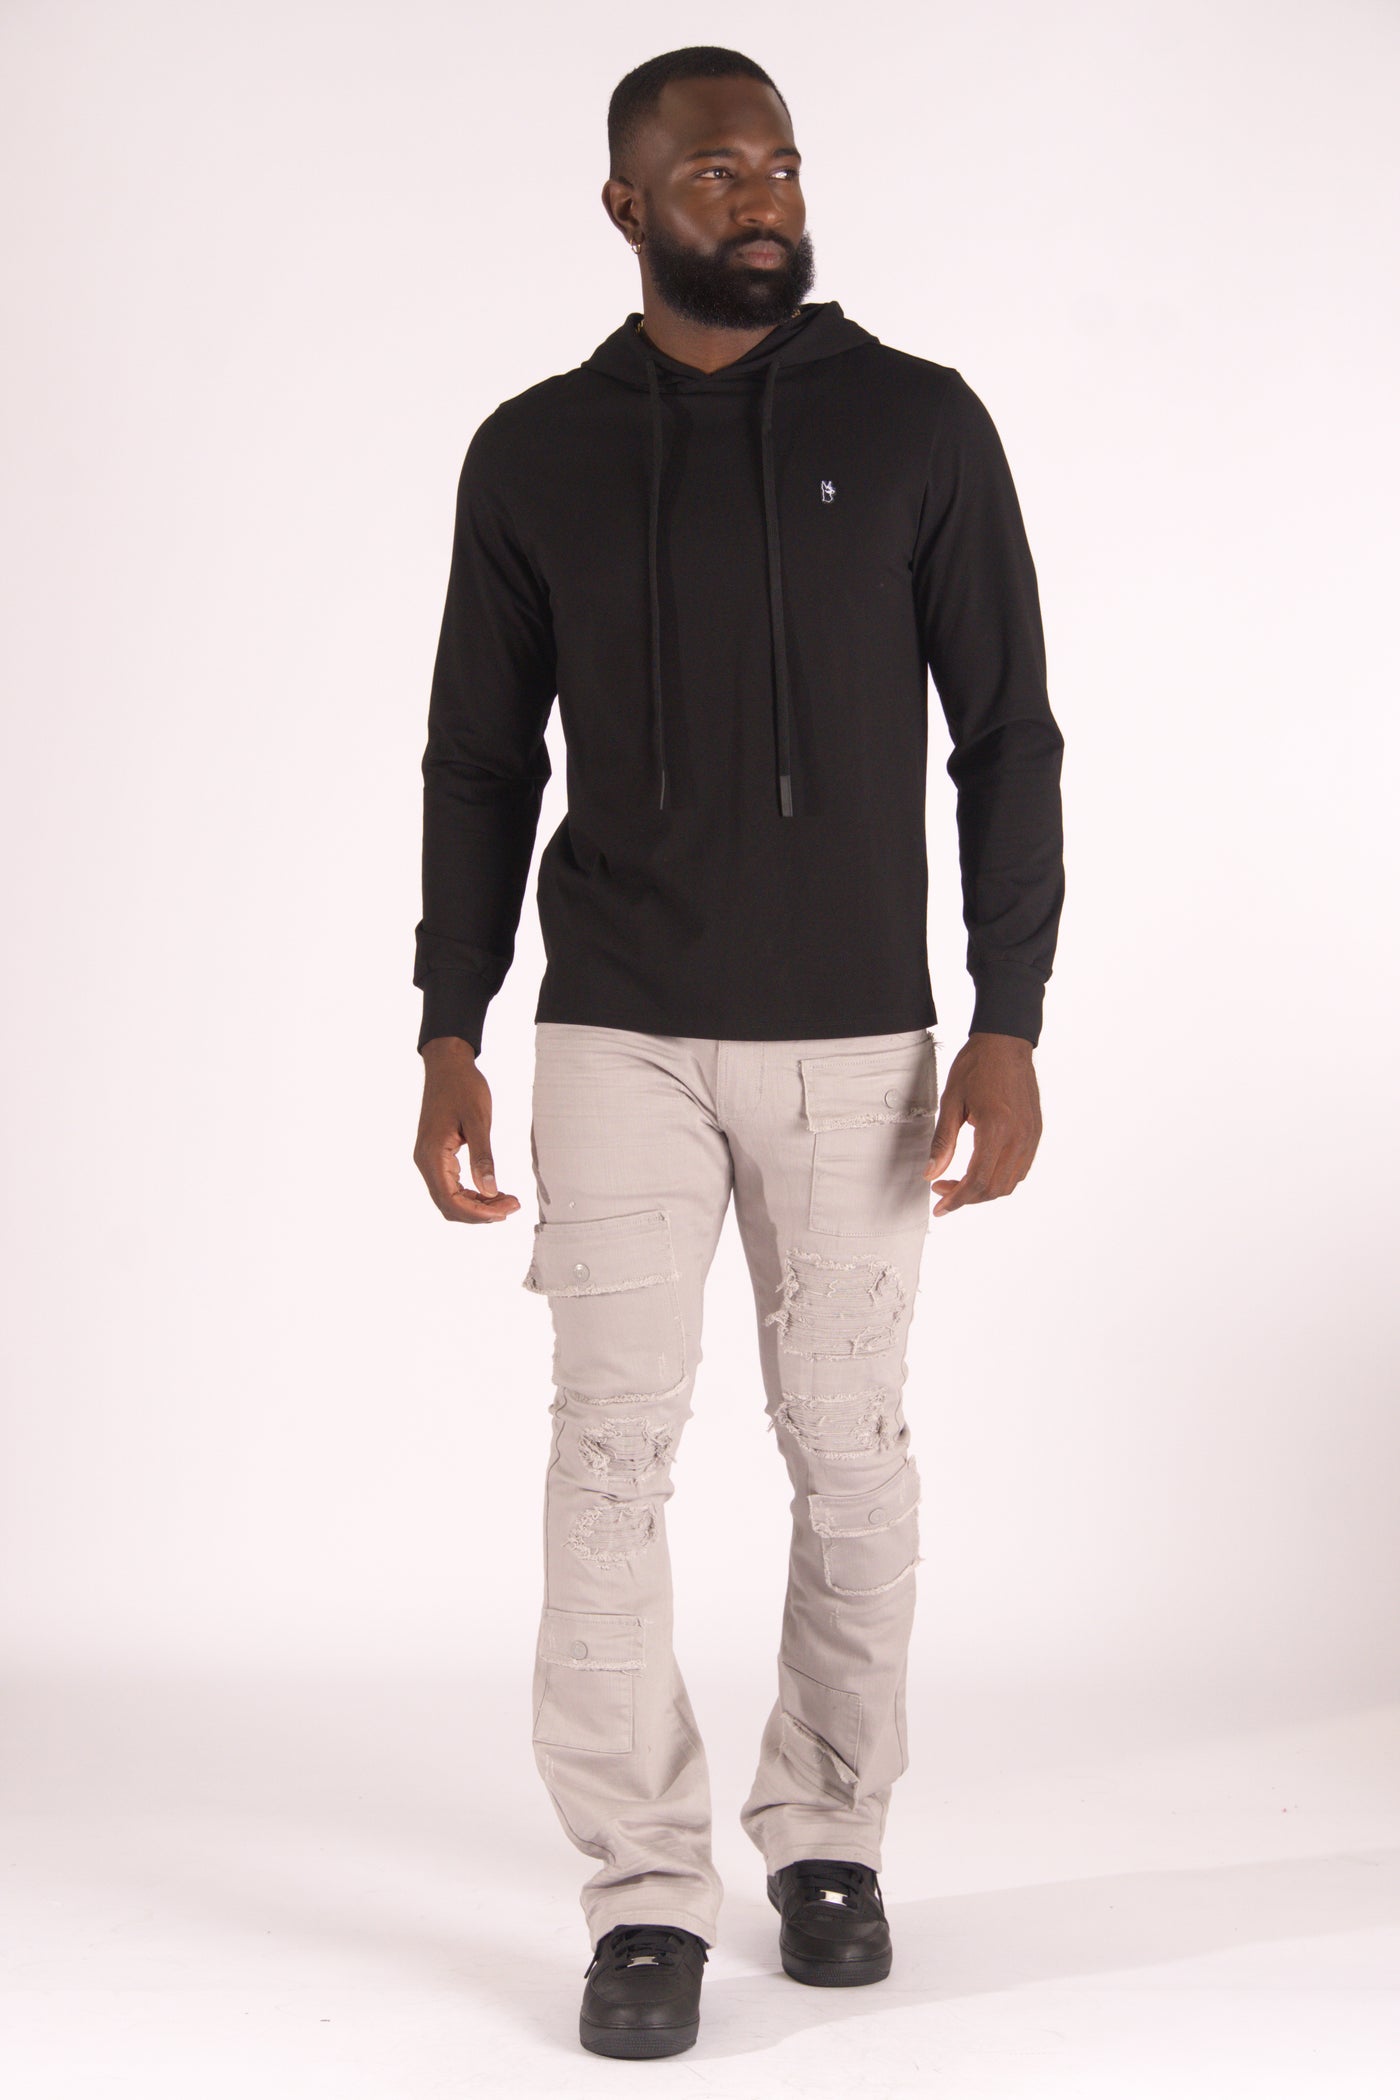 M4500 Luciano Jersey Hoodie - Black